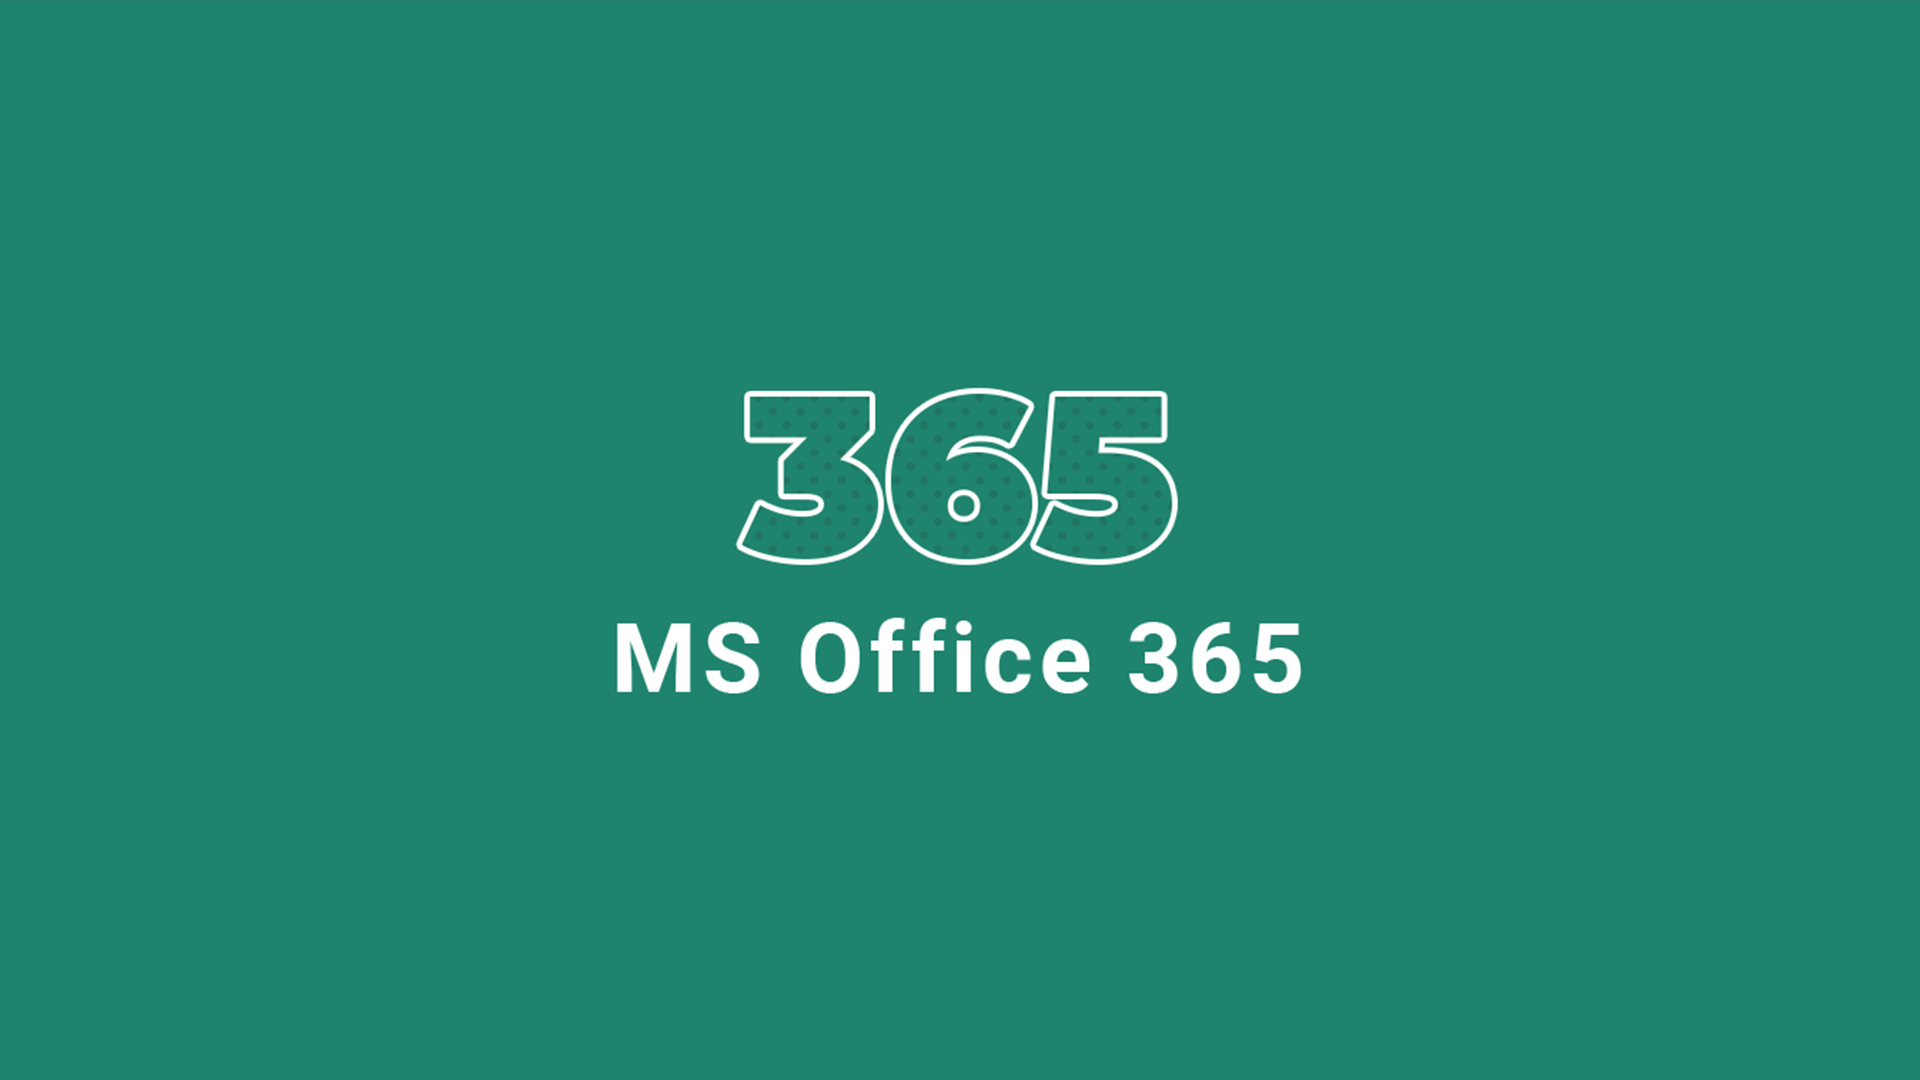 MS Office 365 Family Key (6 Months / 6 Devices) (56.49$)